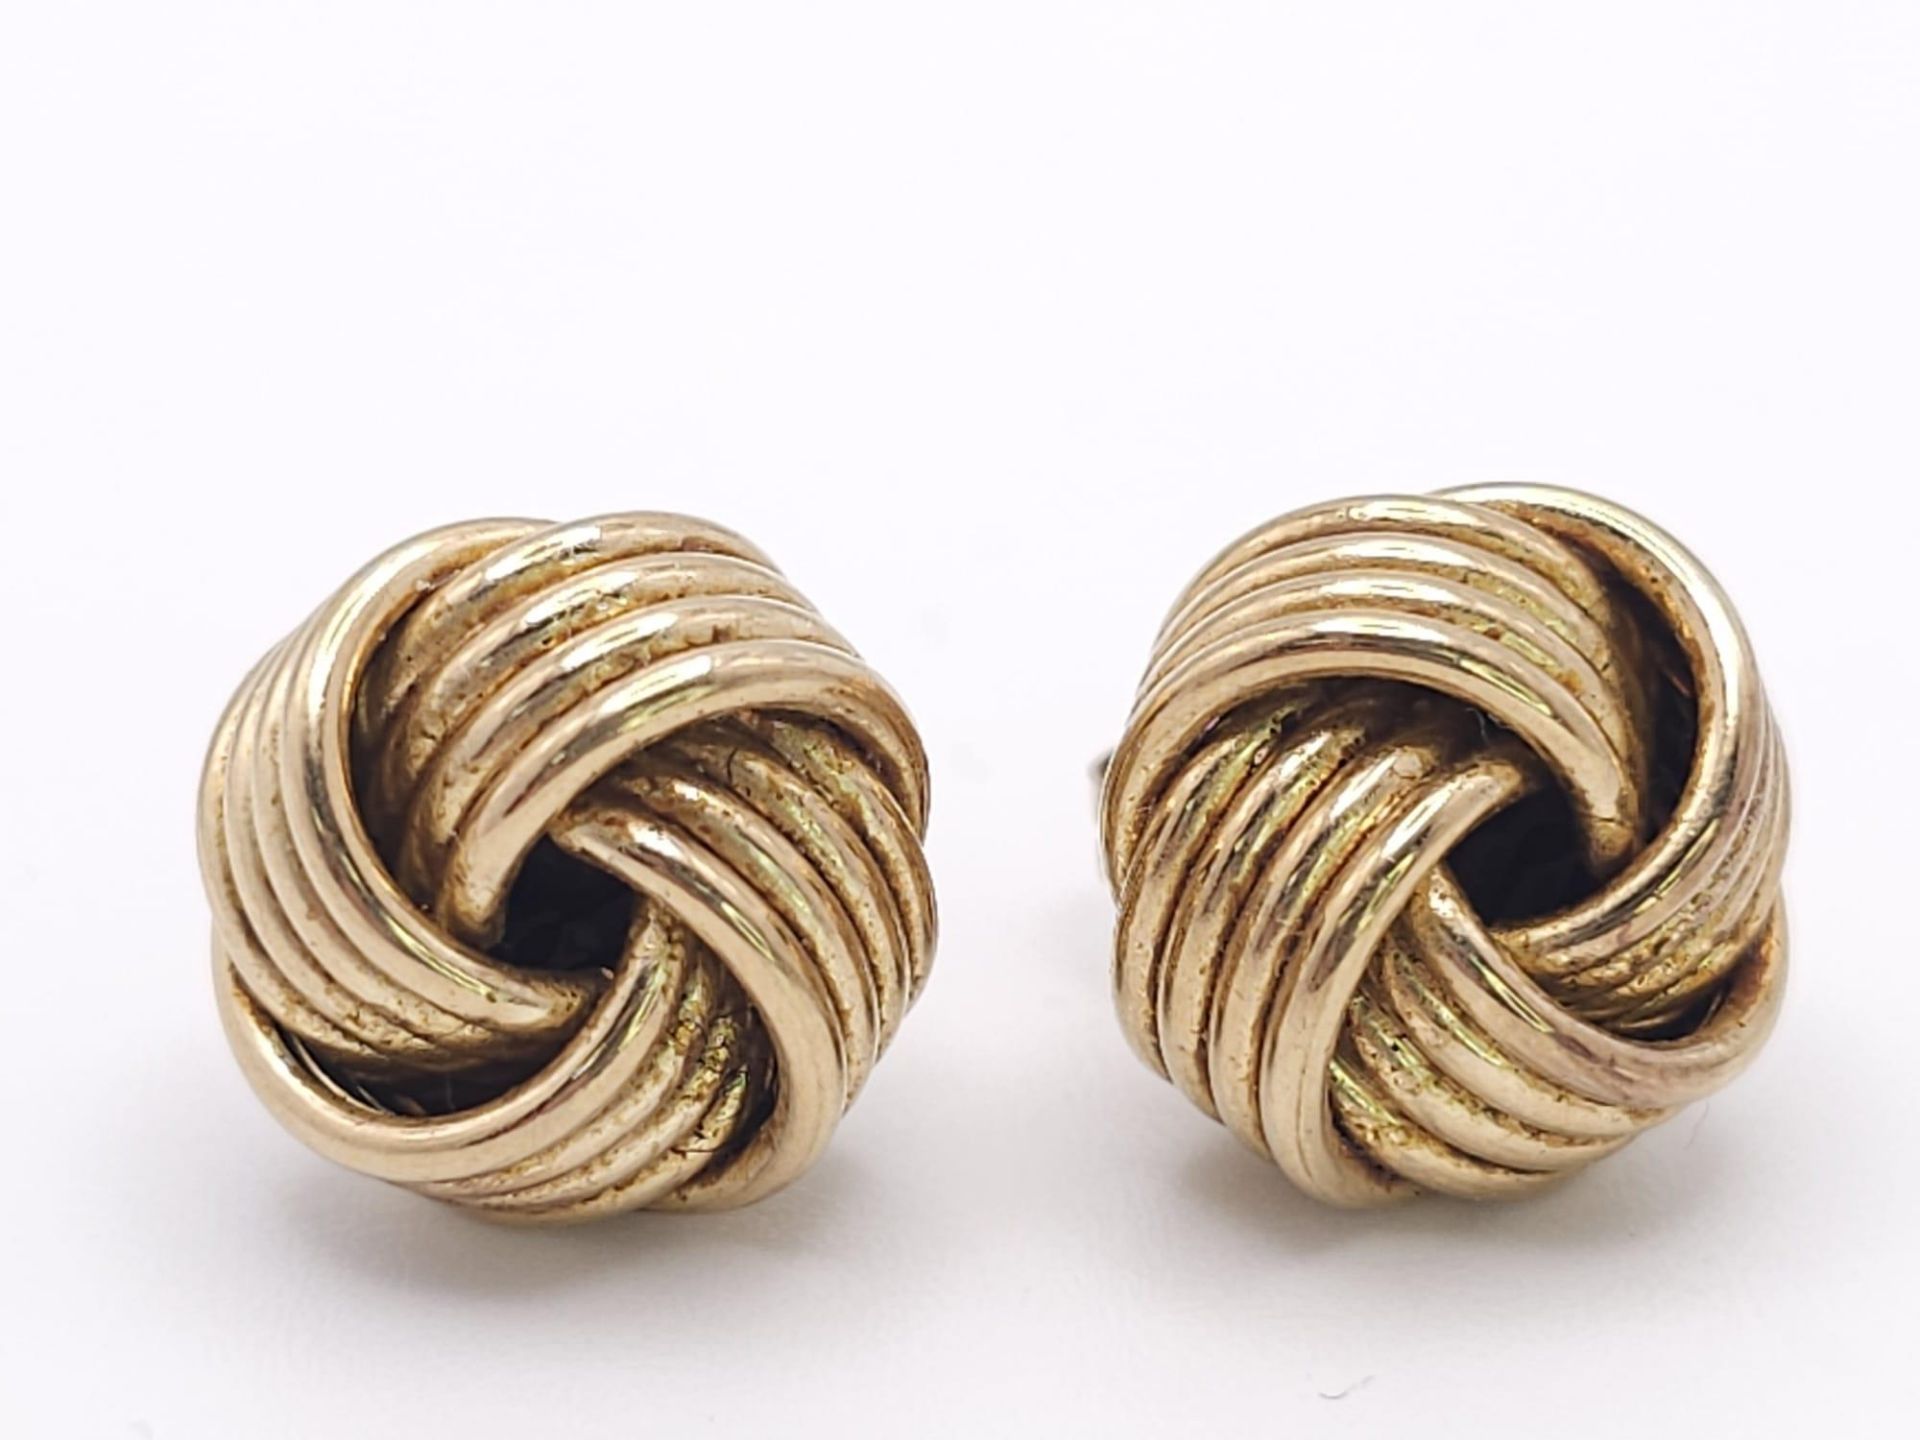 A Pair of 9k Yellow Gold Knot Stud Earrings. 3.8g total weight. Ref: 16469 - Image 2 of 6